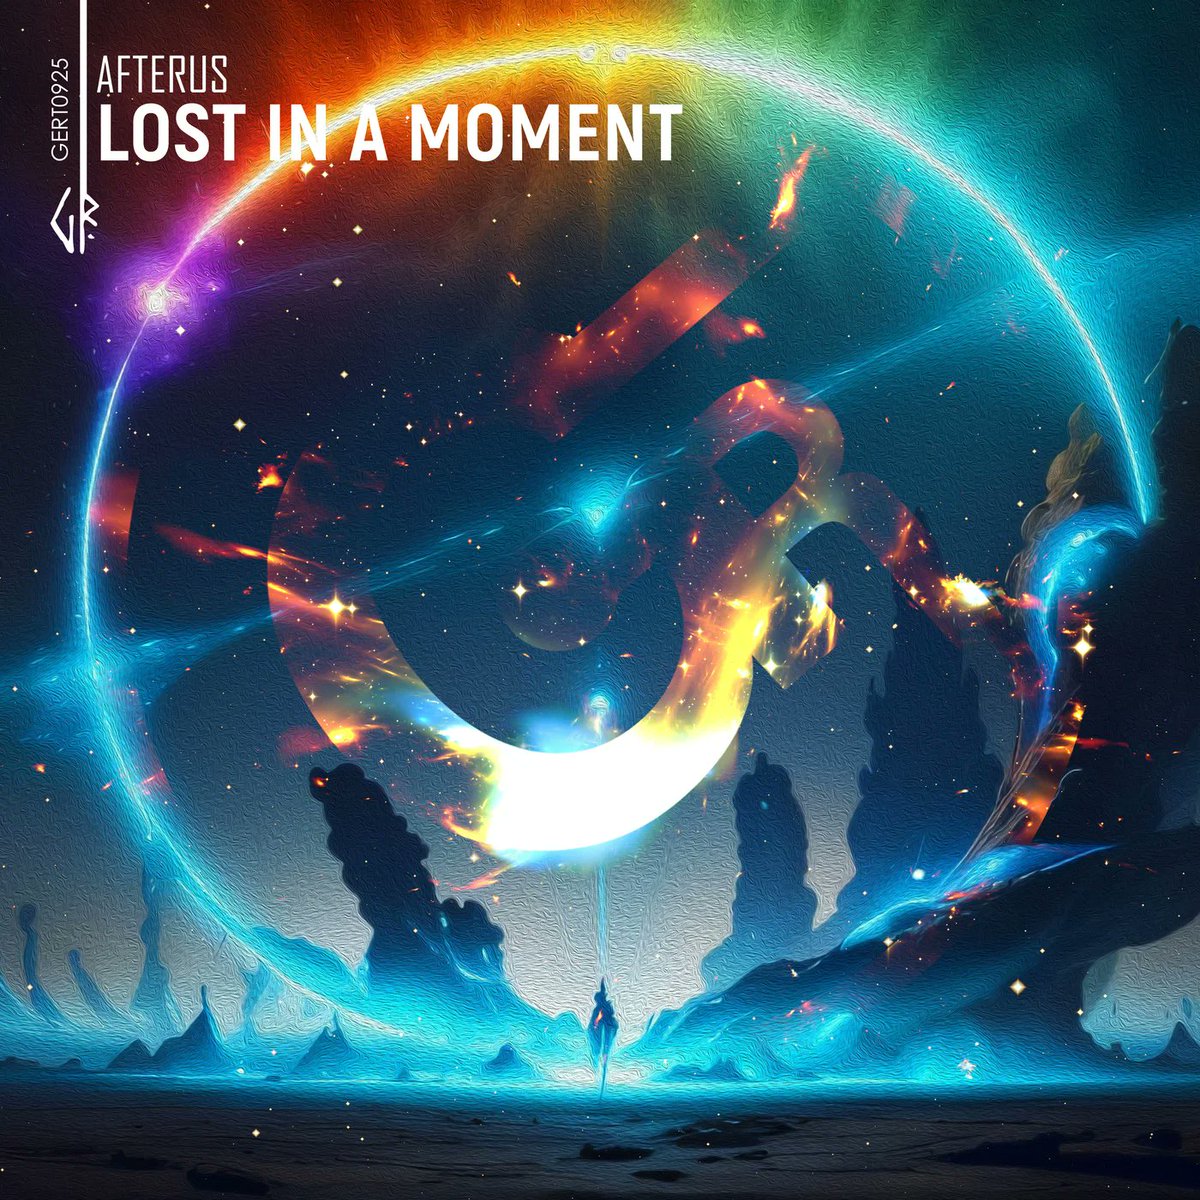 #NowPlaying #SpiritualTrance187 @PlayTranceRadio🔊playtrance.com 09. @MusicAfterus - Lost In A Moment [@GertRecords] #NewMusic #Trance #TranceFamily